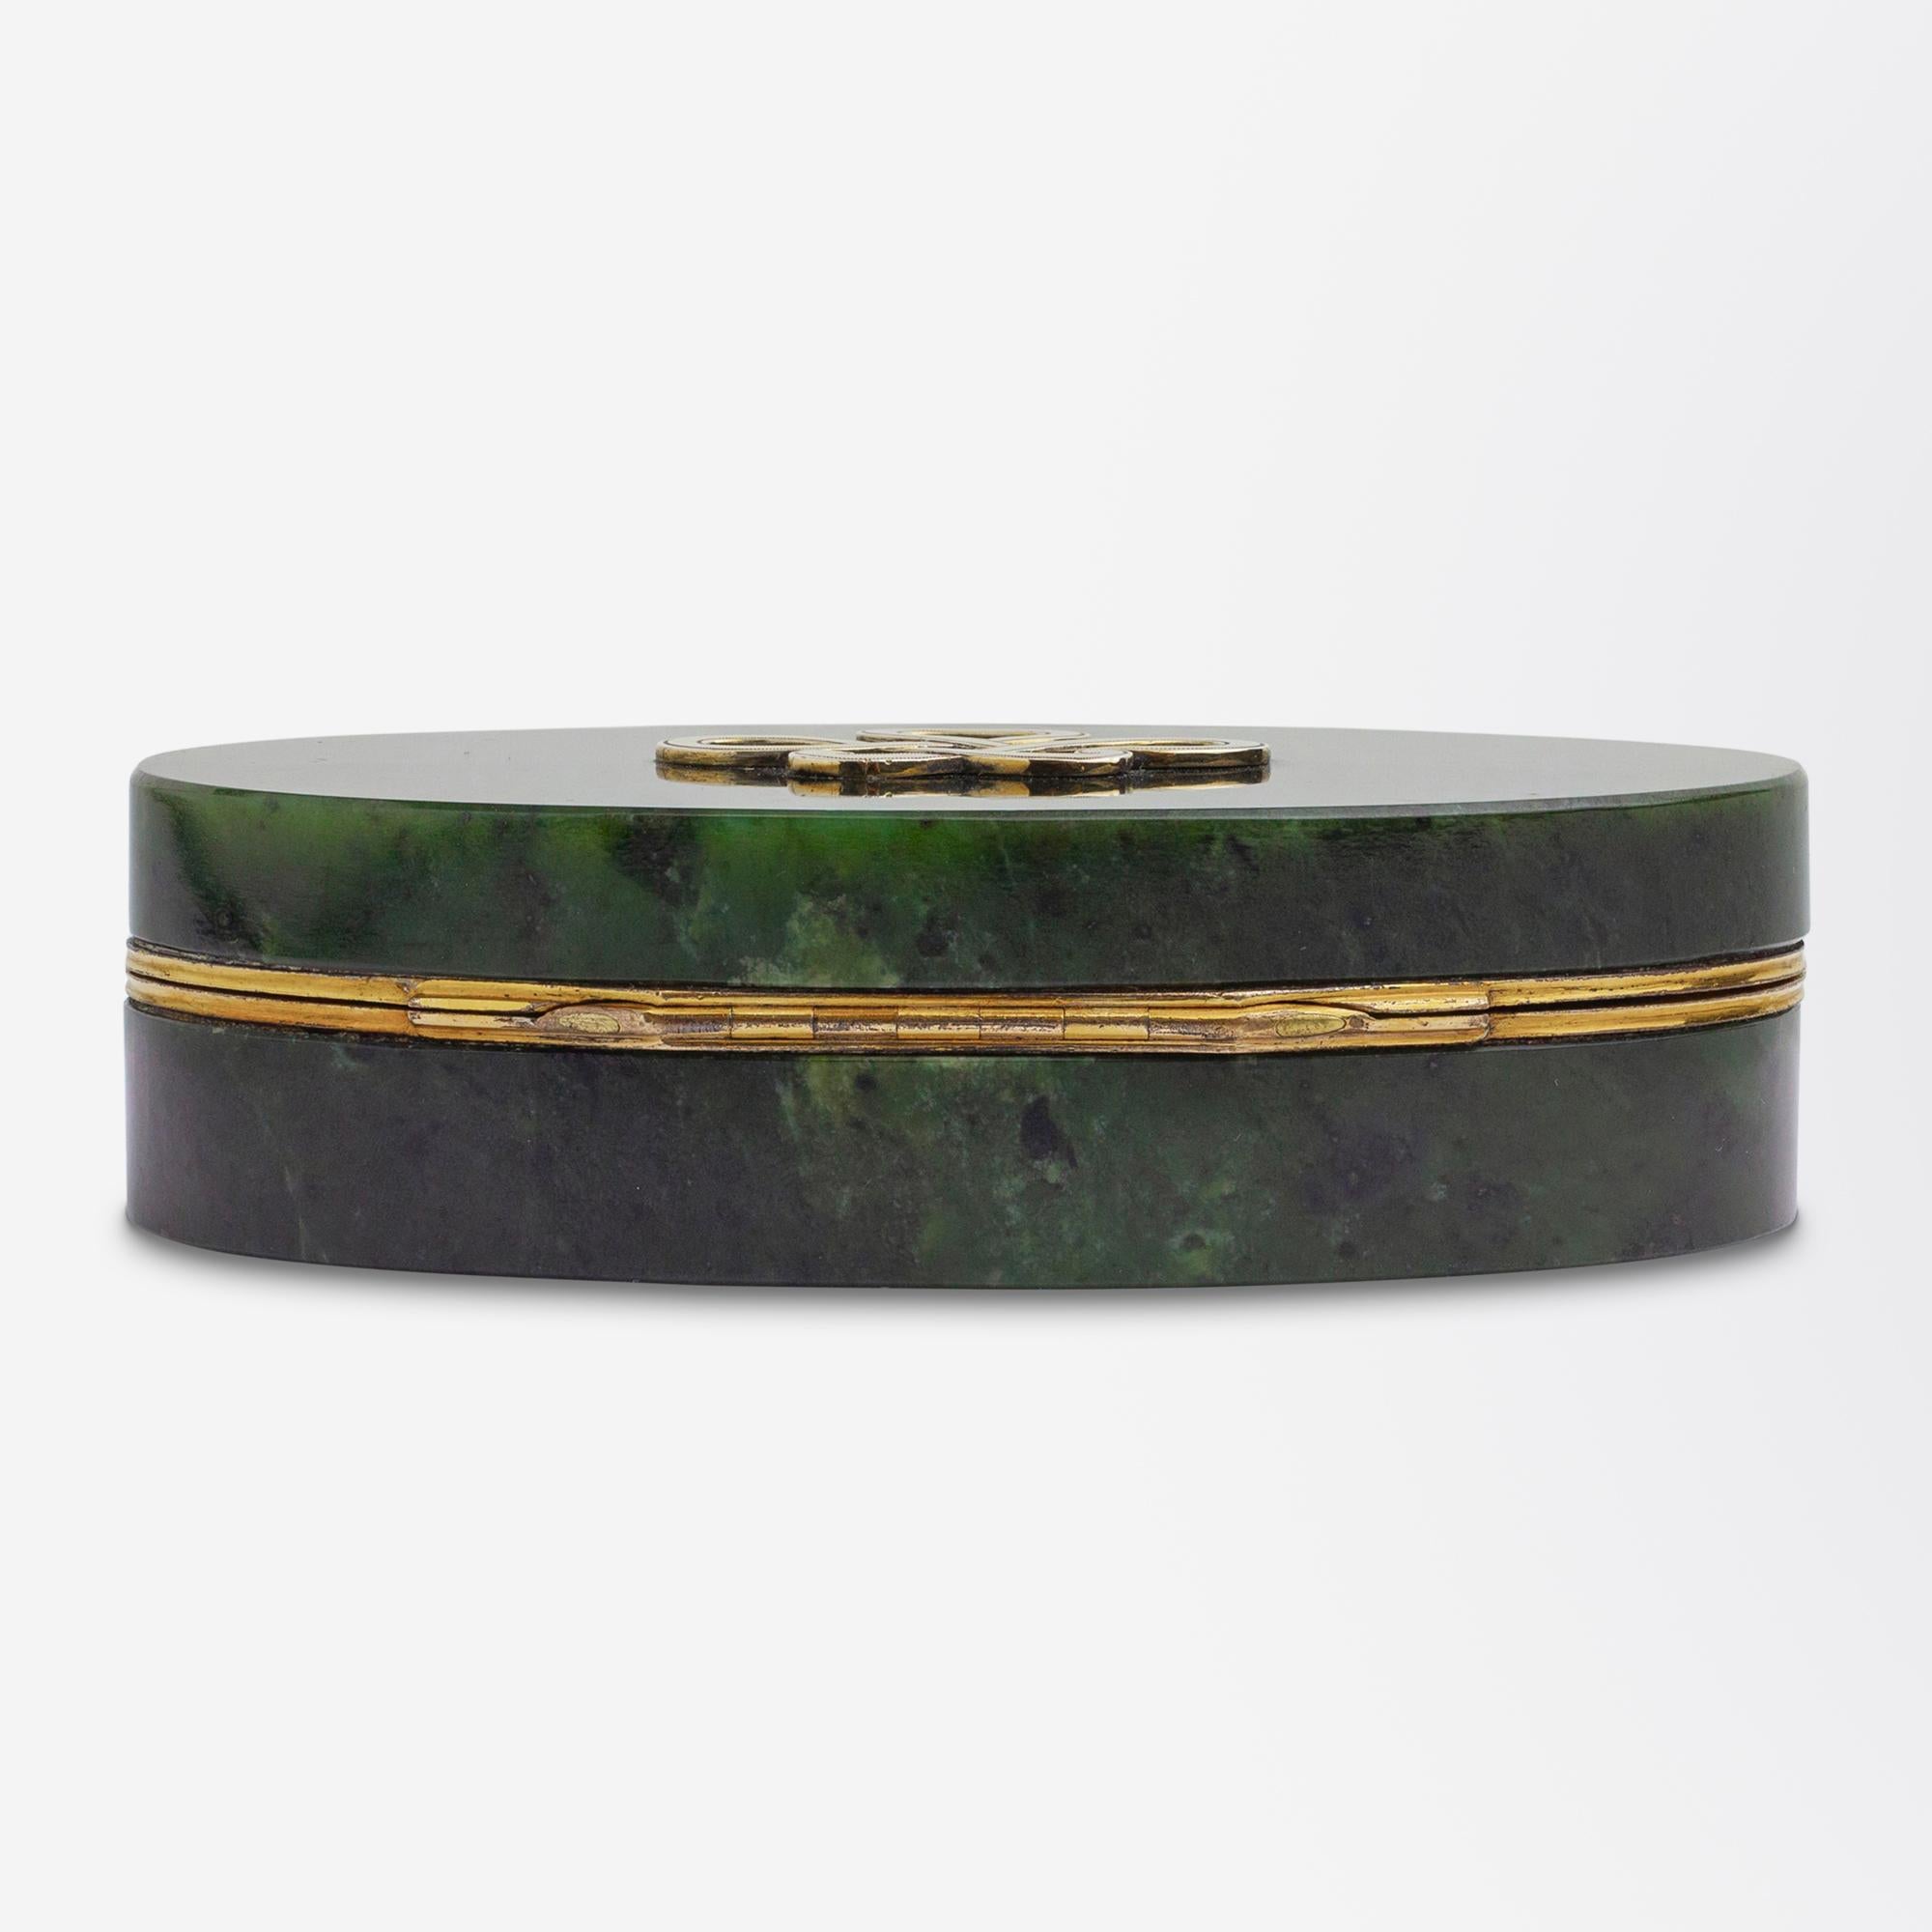 Women's or Men's Spinach Jade & Gilt Metal Box, Likely Russian